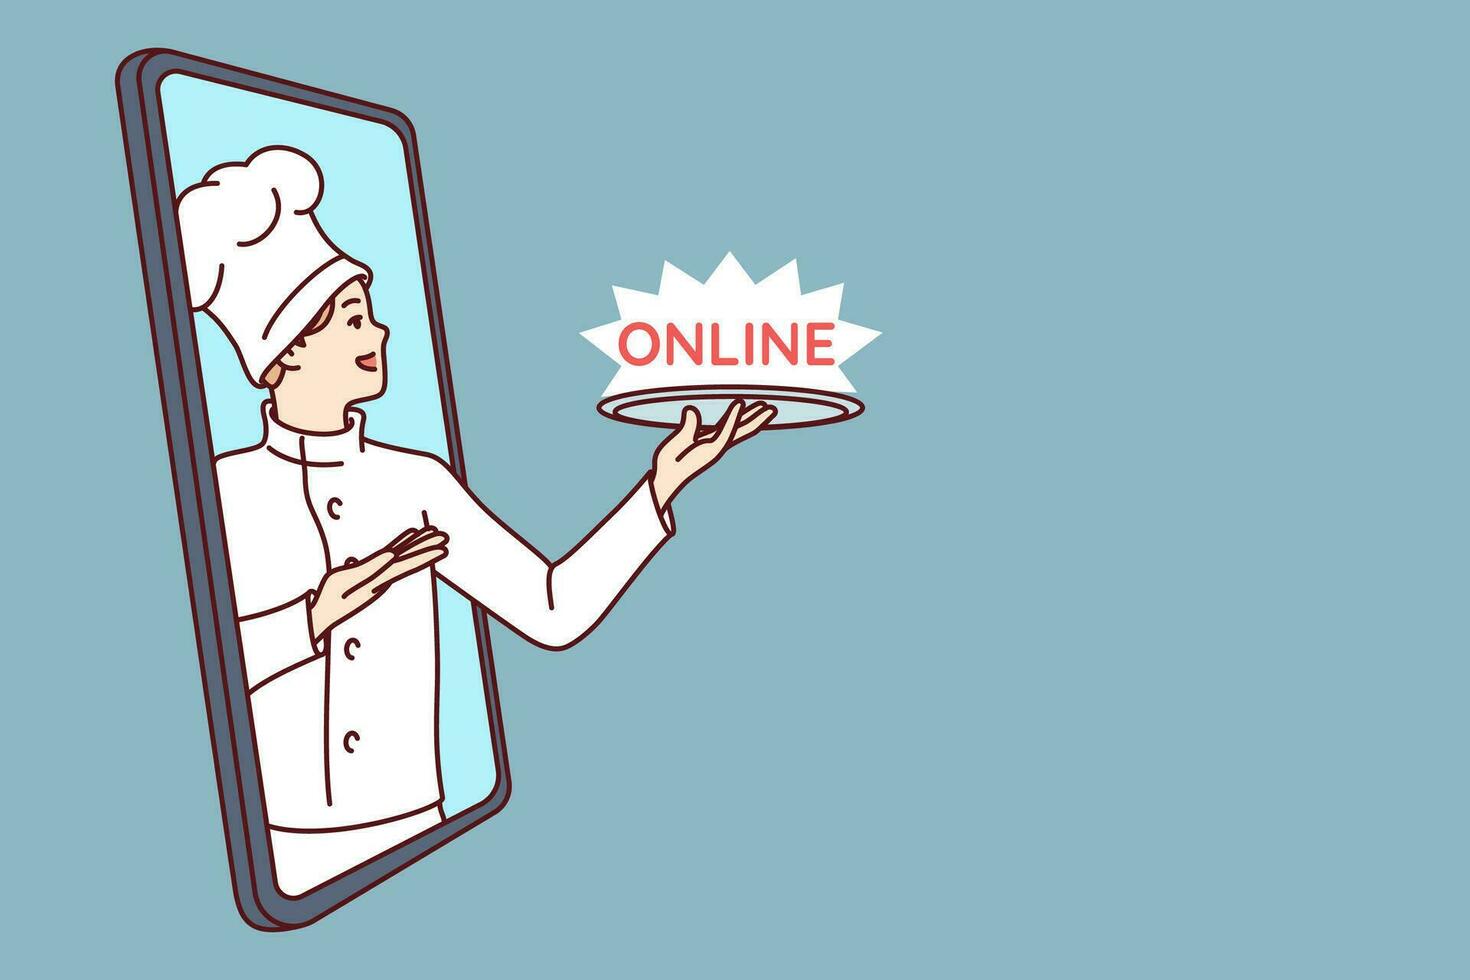 Man restaurant chef with word online on tray looks out phone screen offering to download application vector